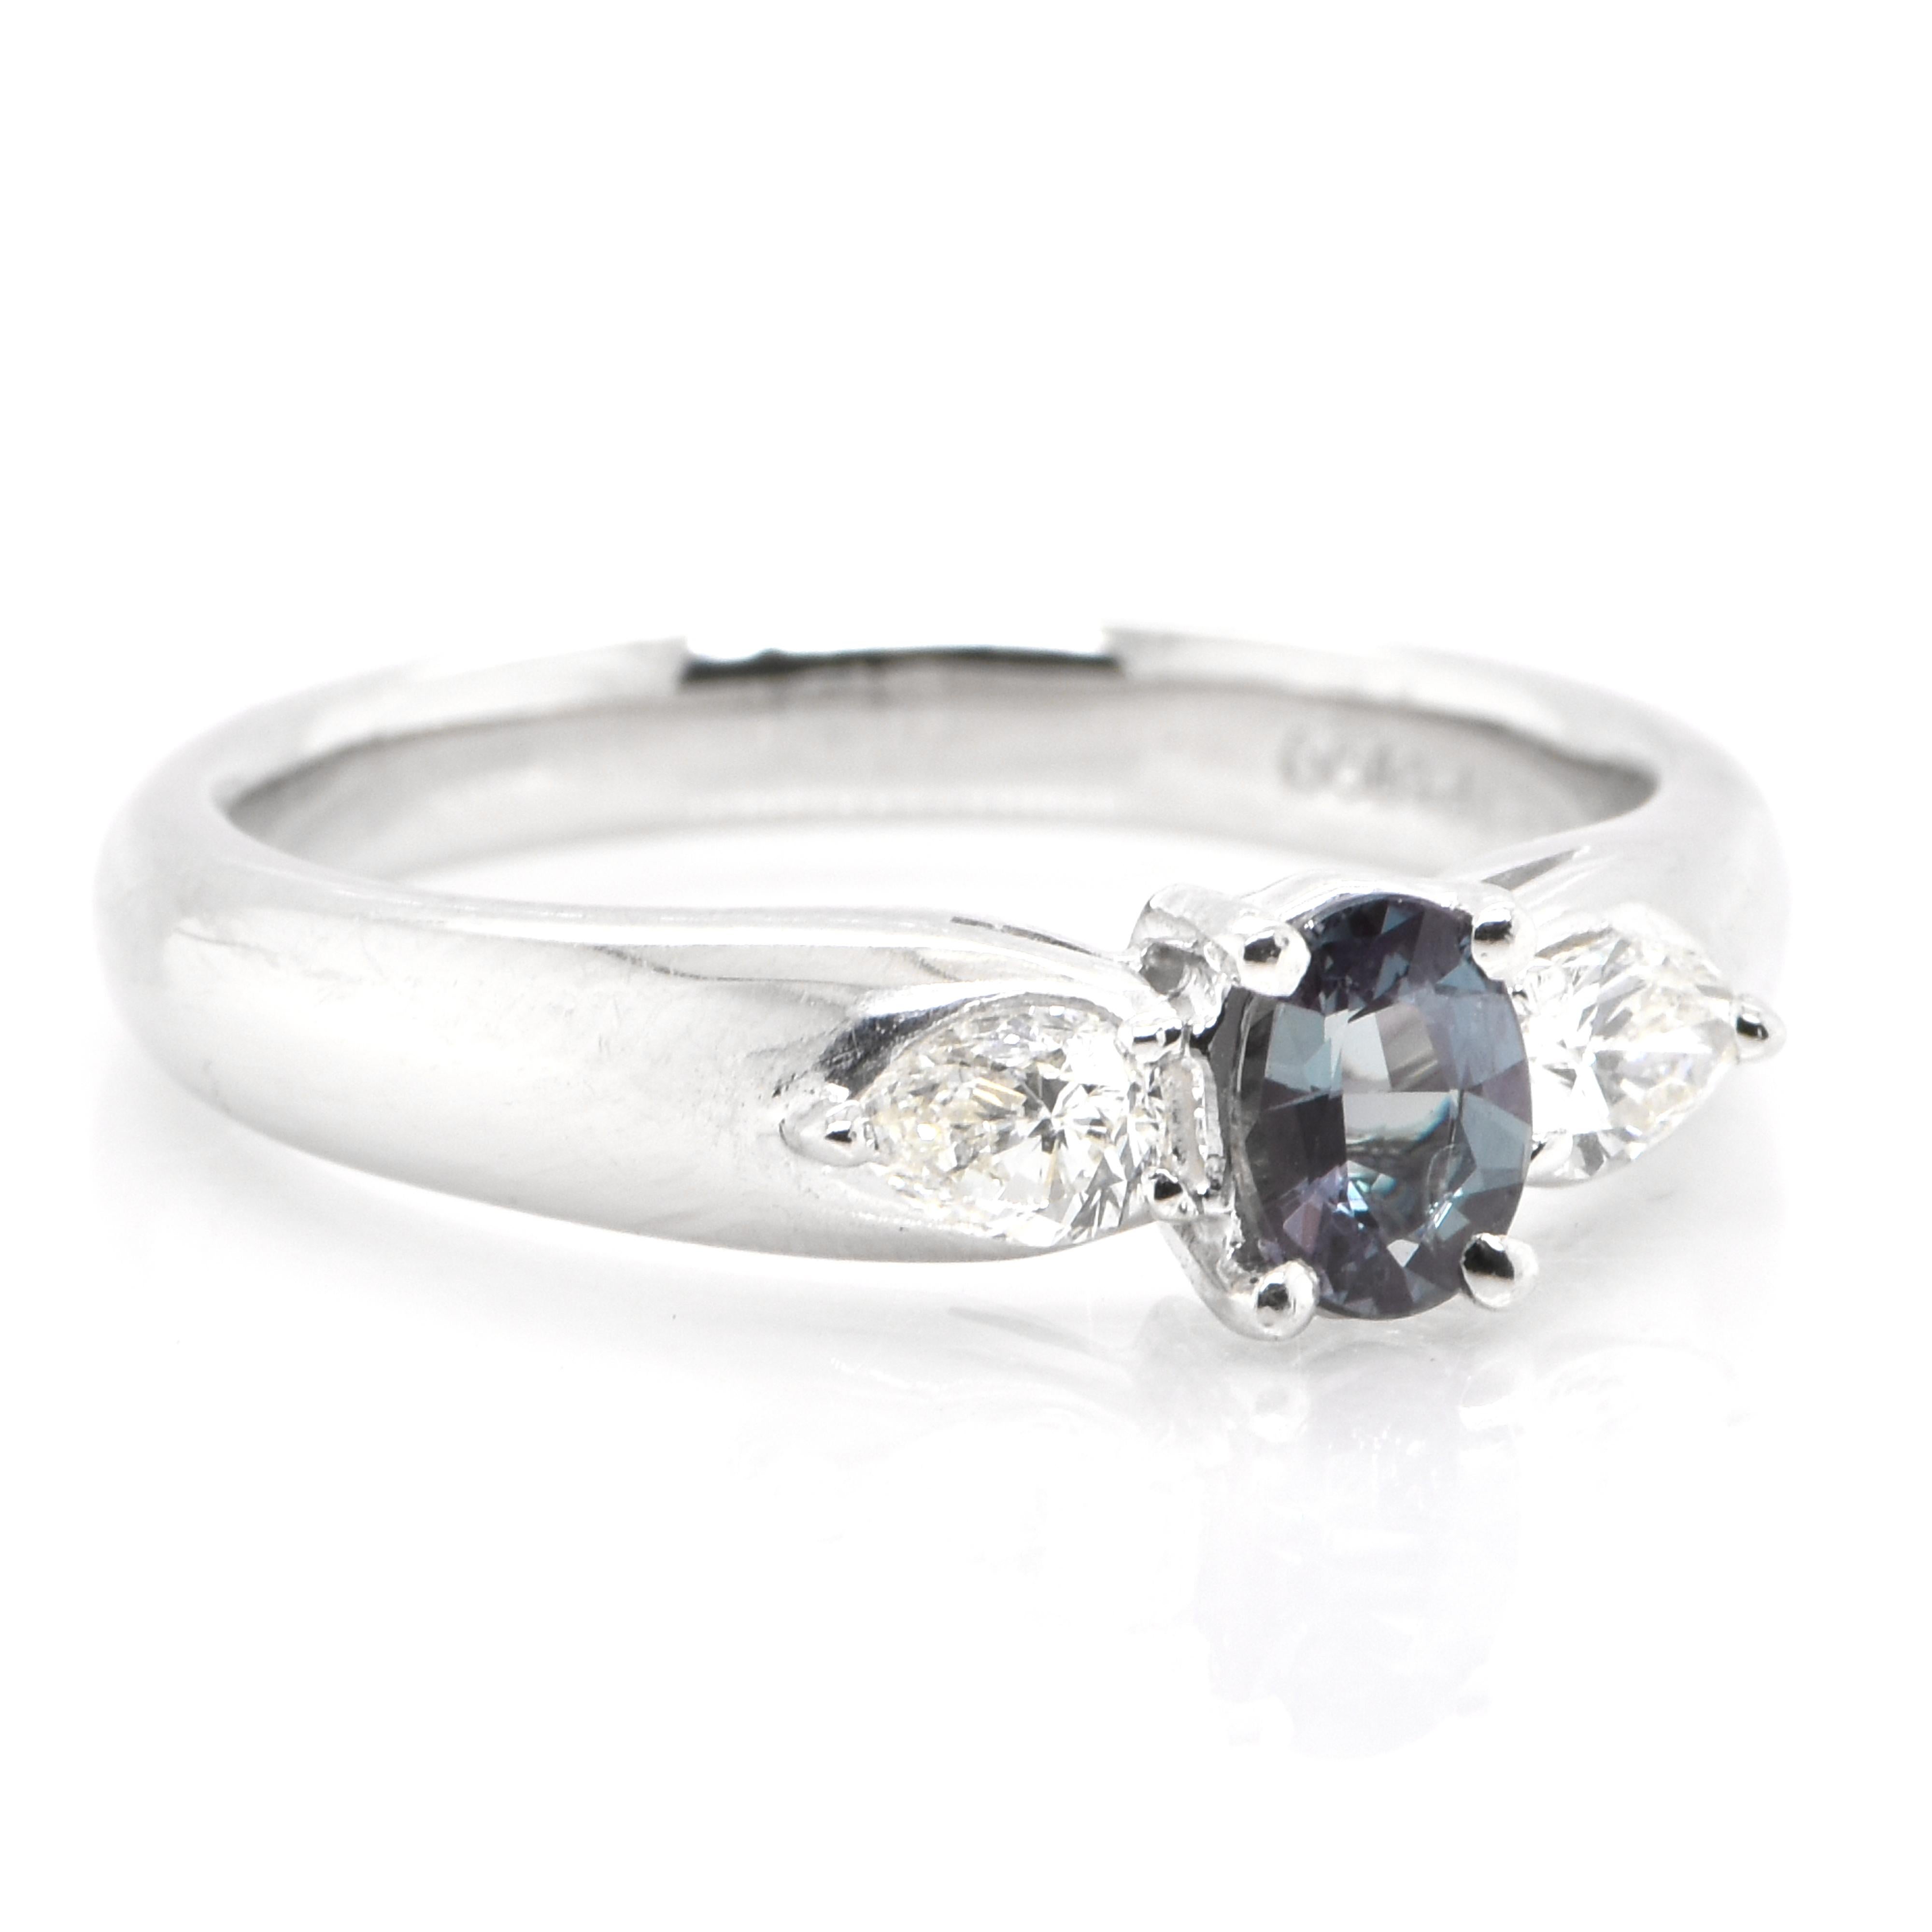 A gorgeous ring featuring a 0.34 Carat, Natural Alexandrite and 0.30 Carats of Diamond Accents set in Platinum. Alexandrites produce a natural color-change phenomenon as they exhibit a Bluish Green Color under Fluorescent Light whereas a Purplish